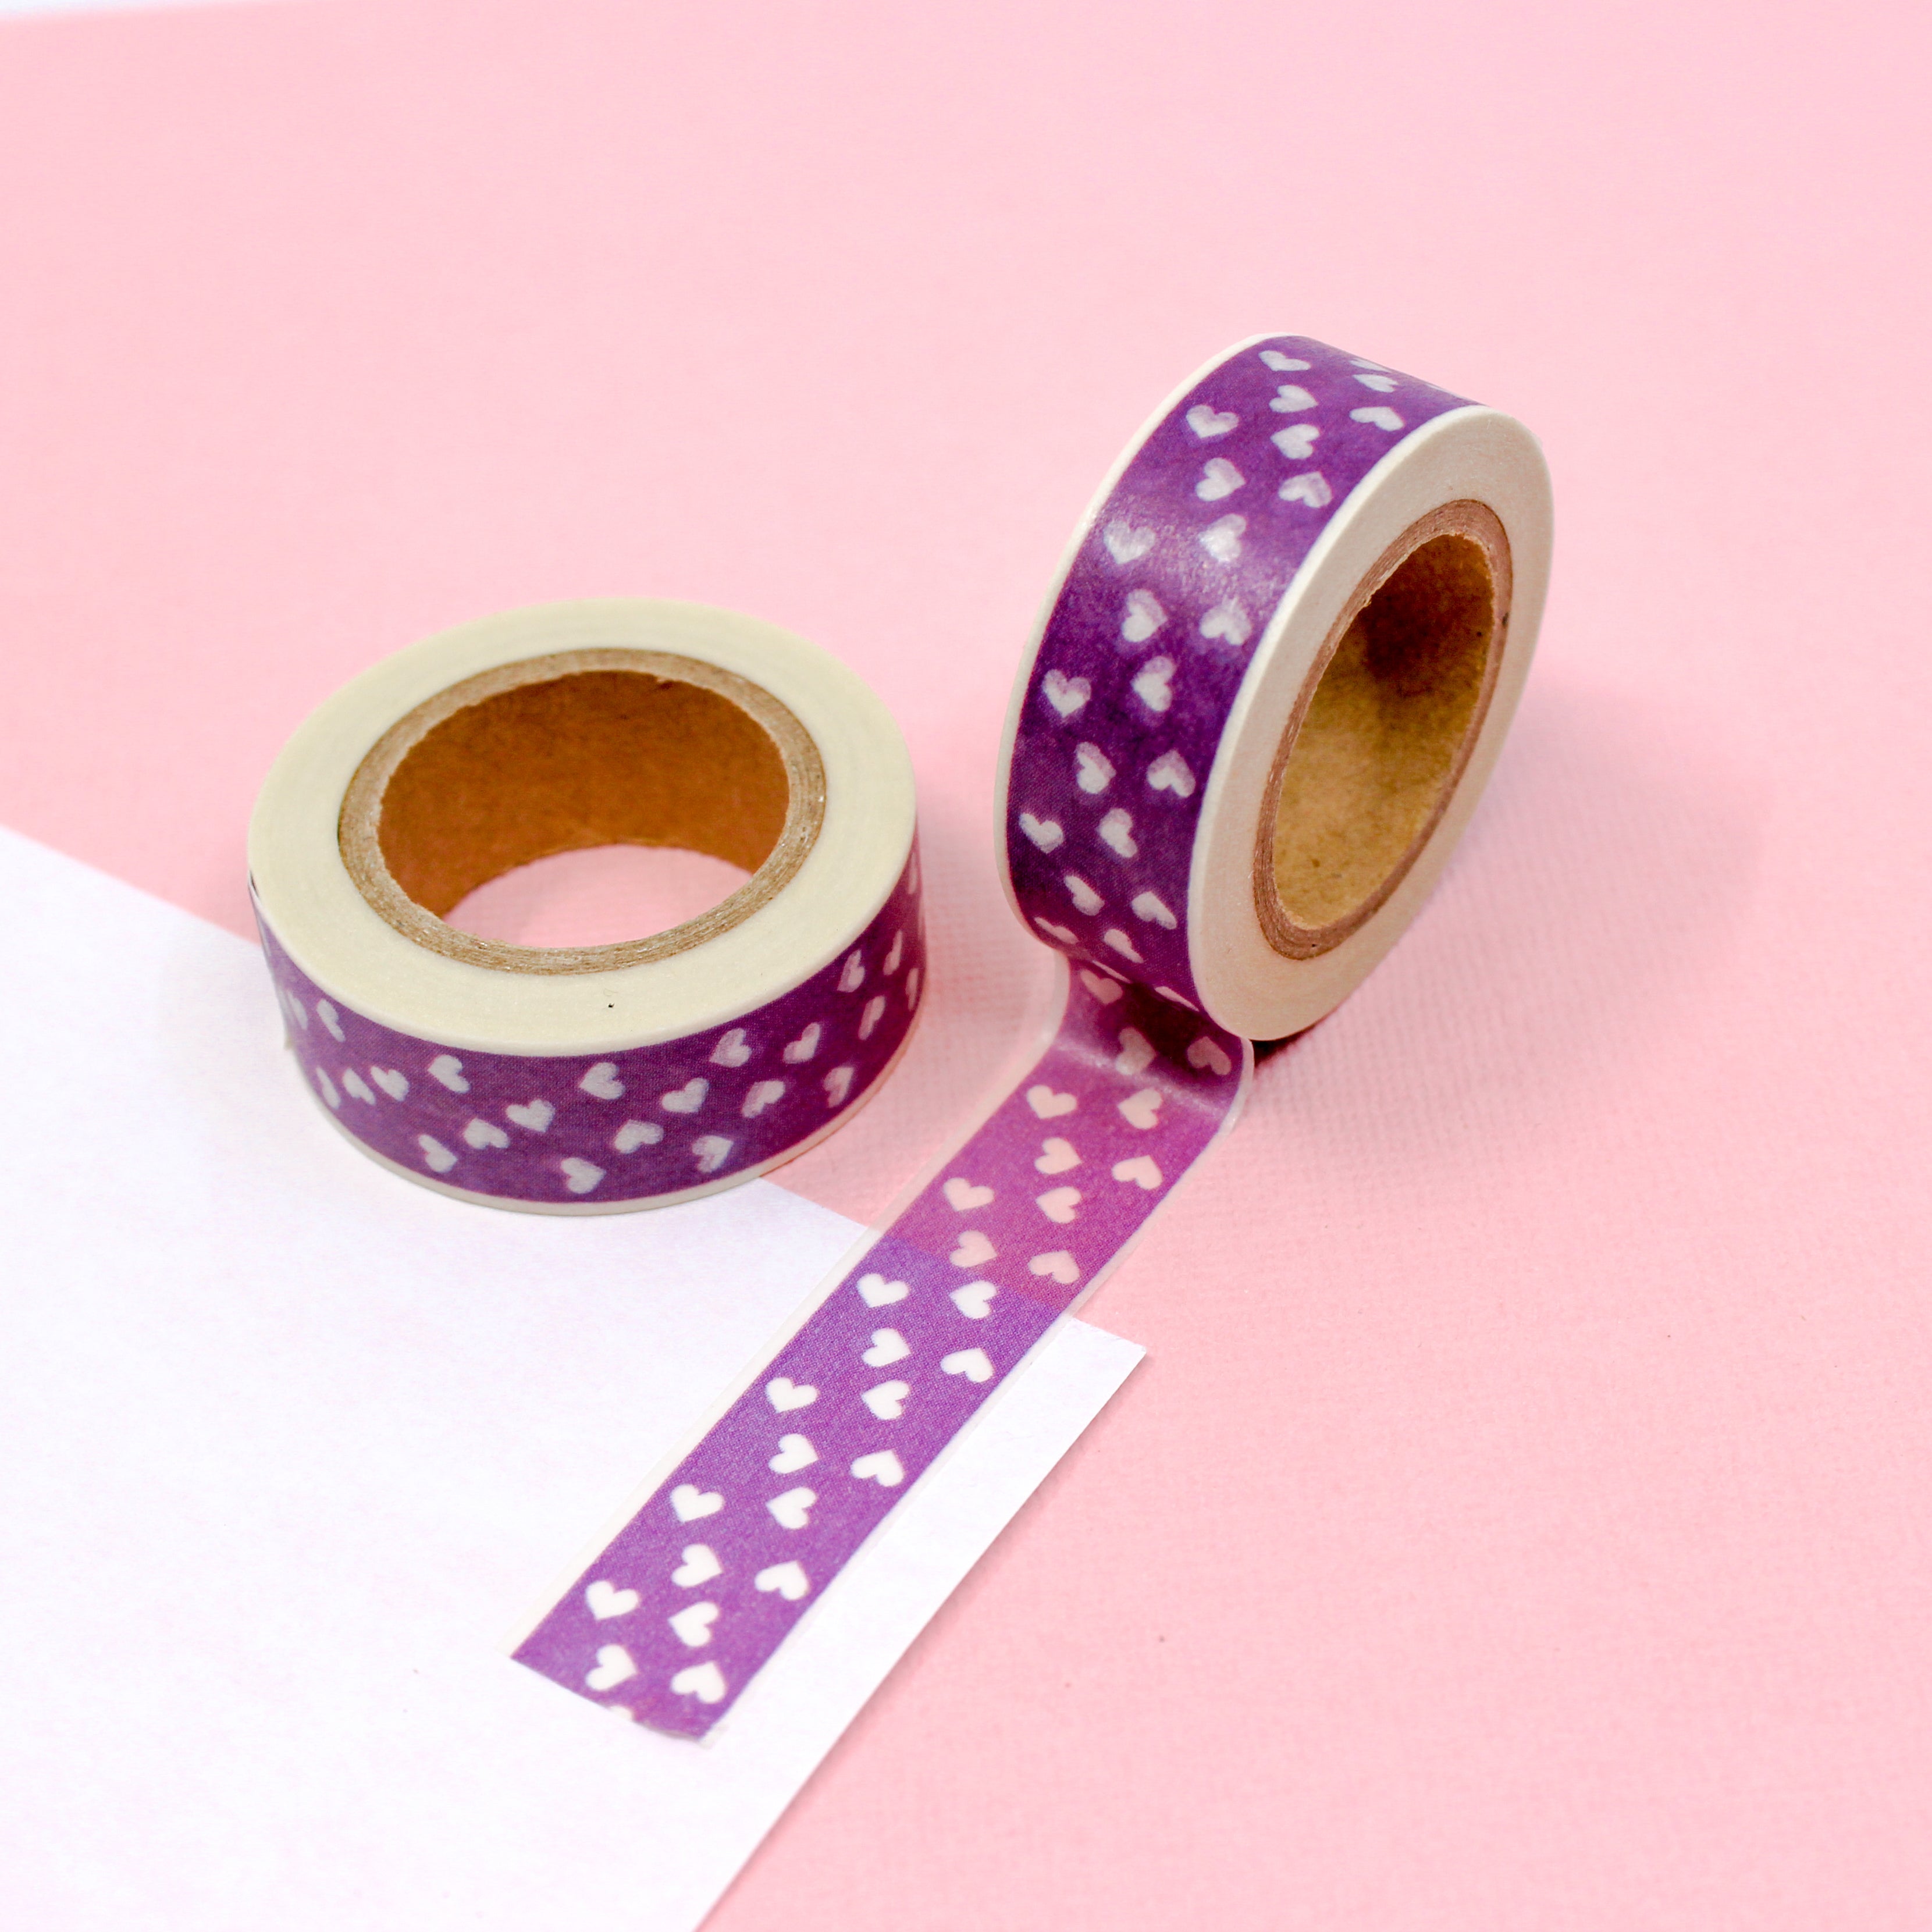 This is a purple multi hearts-themed washi tape from BBB Supplies Craft Shop